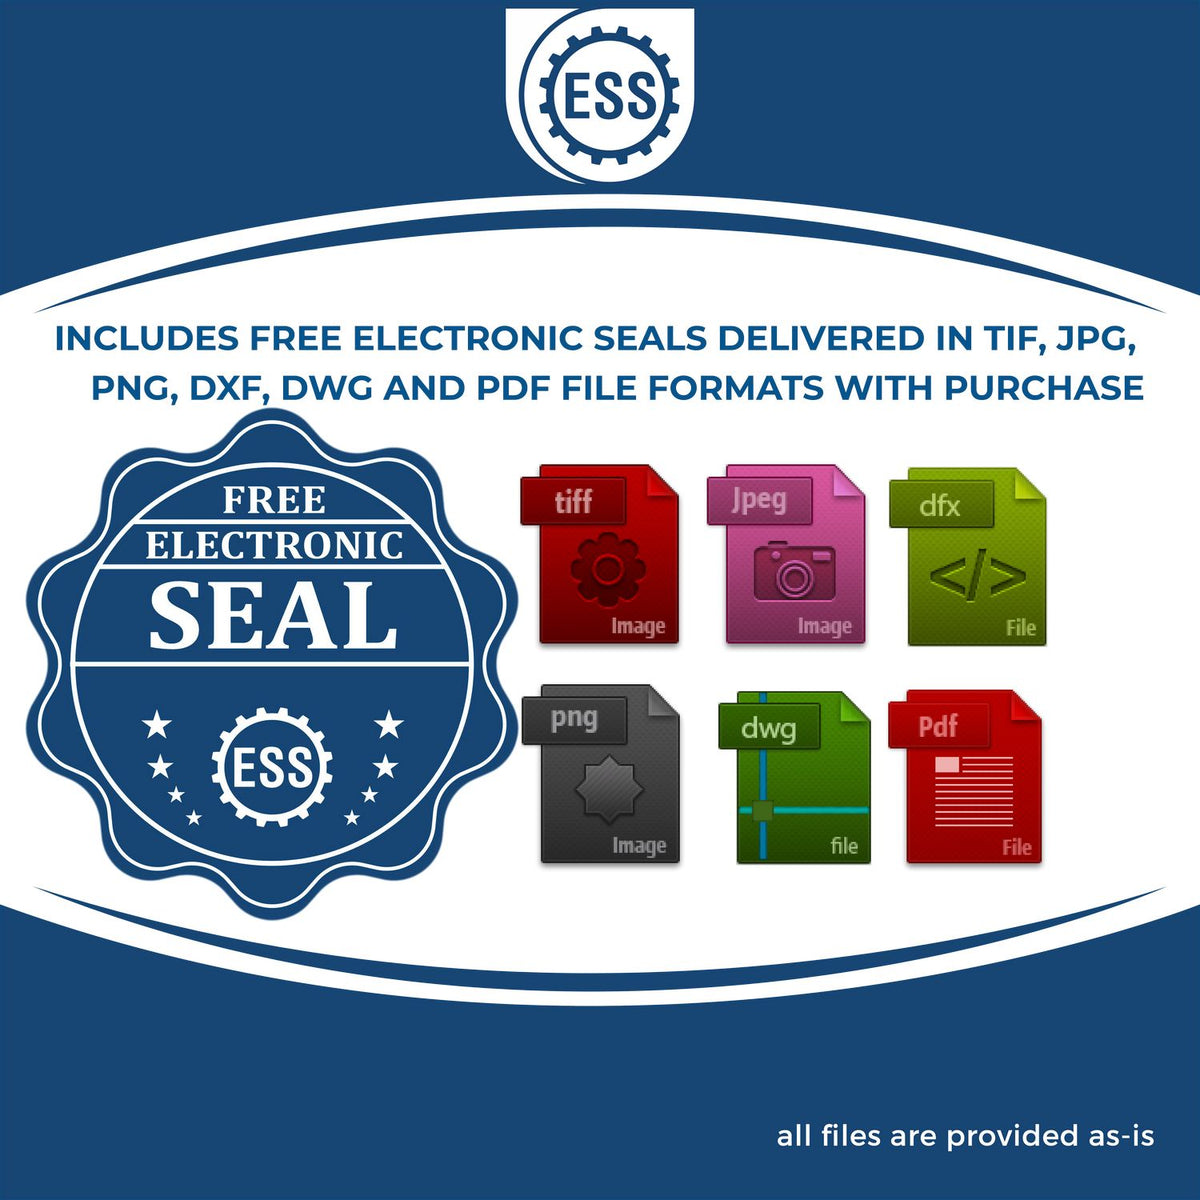 An infographic for the free electronic seal for the Self-Inking Texas PE Stamp illustrating the different file type icons such as DXF, DWG, TIF, JPG and PNG.